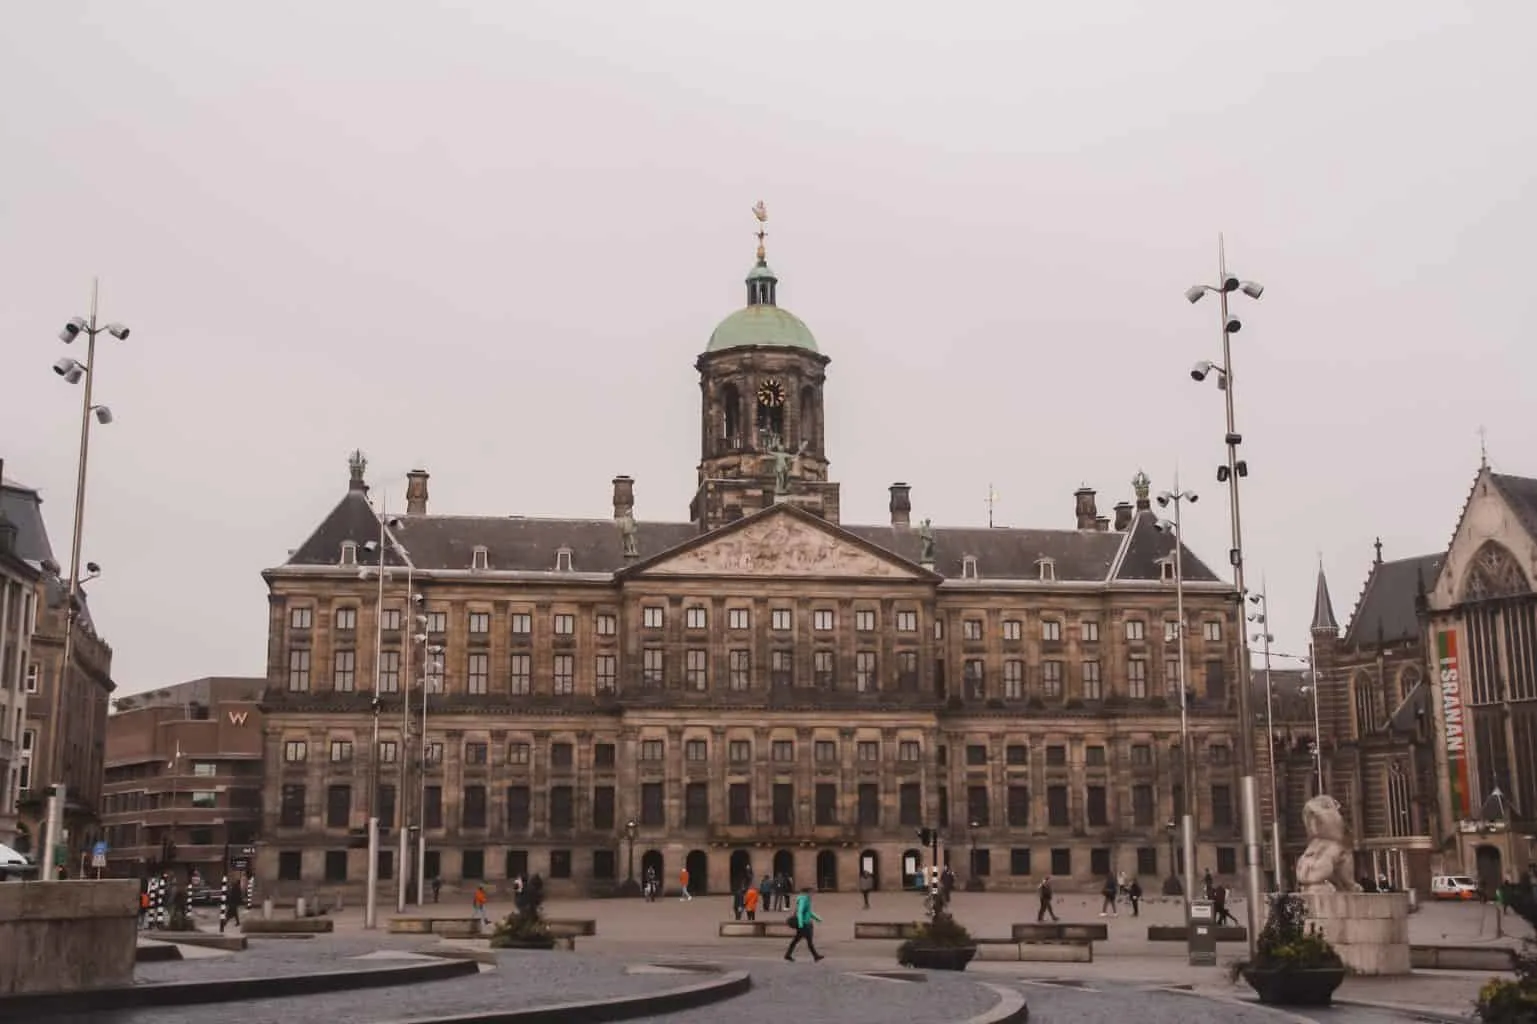 The impressive and expansive, Golden Age exterior of the Royal Palace in Amsterdam's Dam Square, 